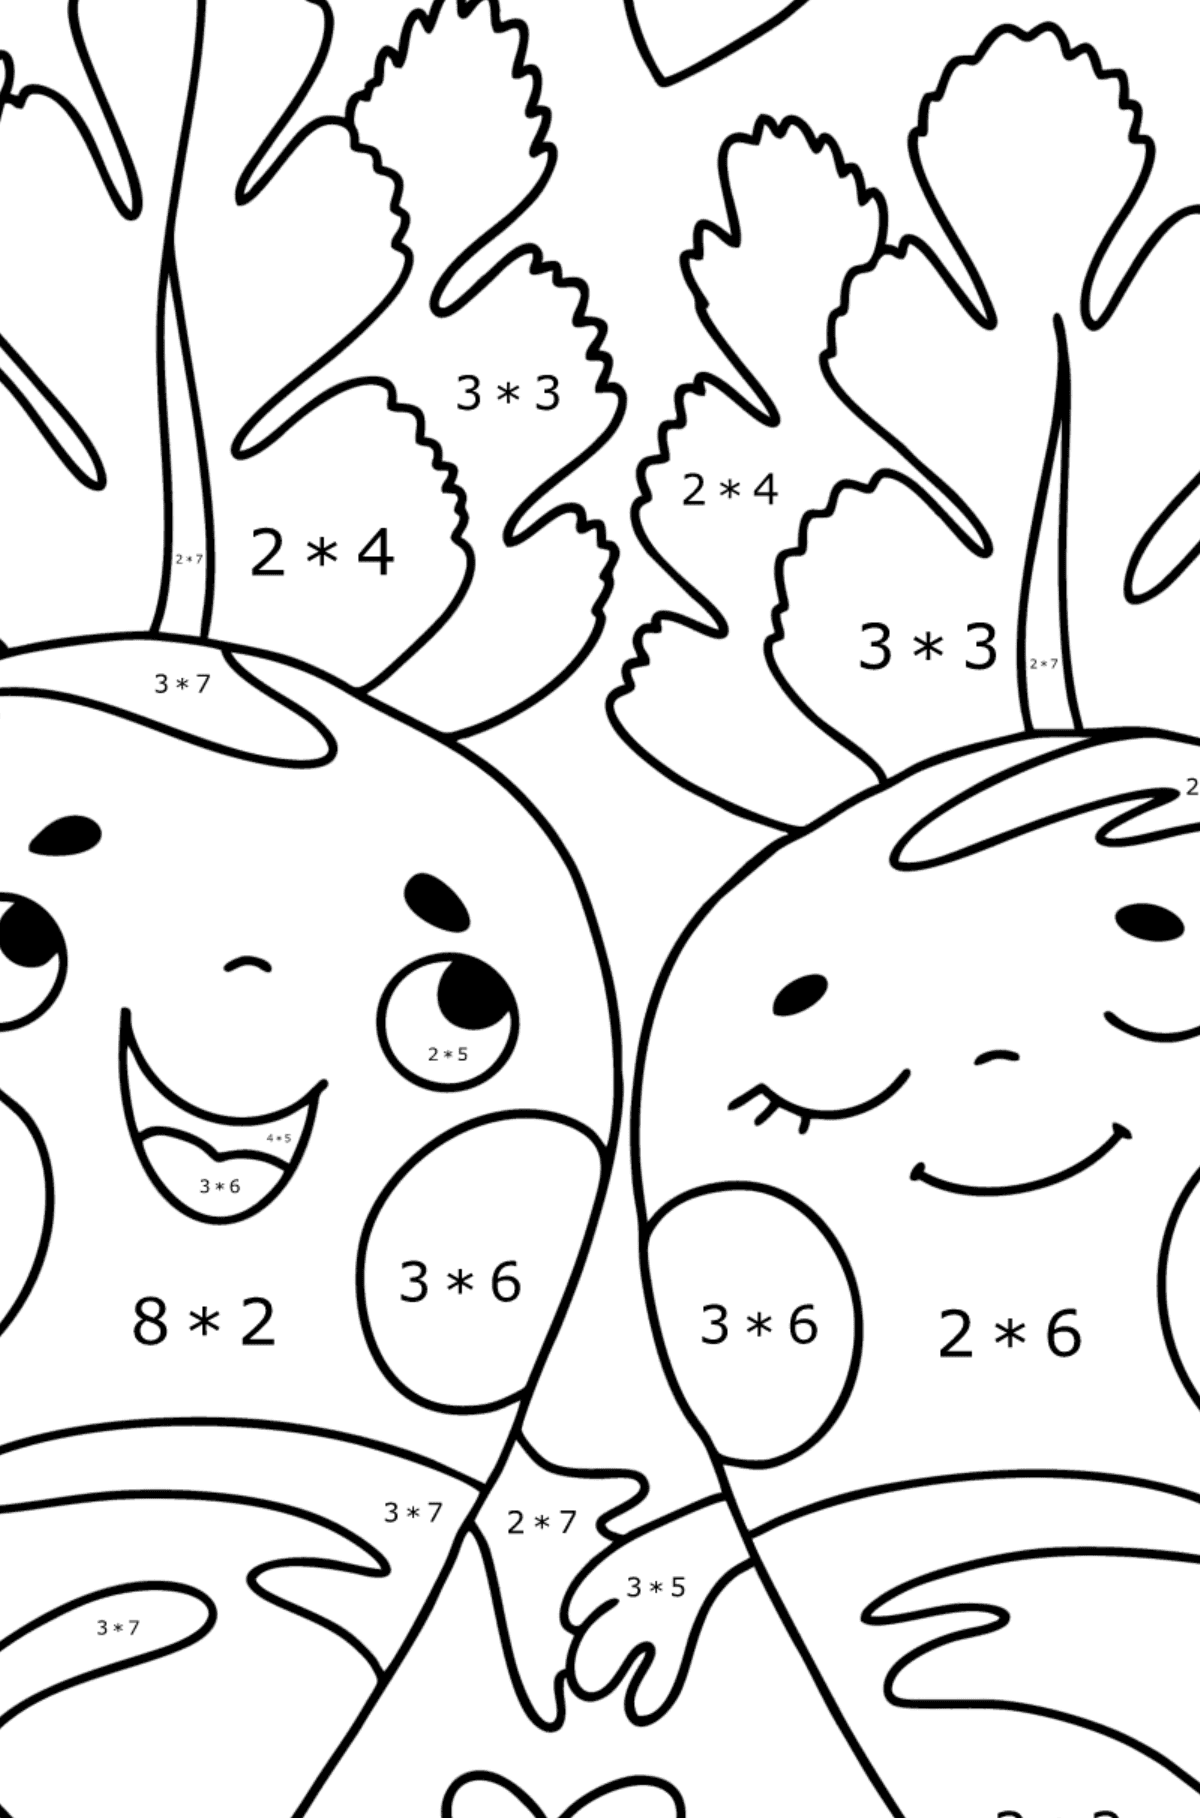 Carrots in love сolouring page - Math Coloring - Multiplication for Kids